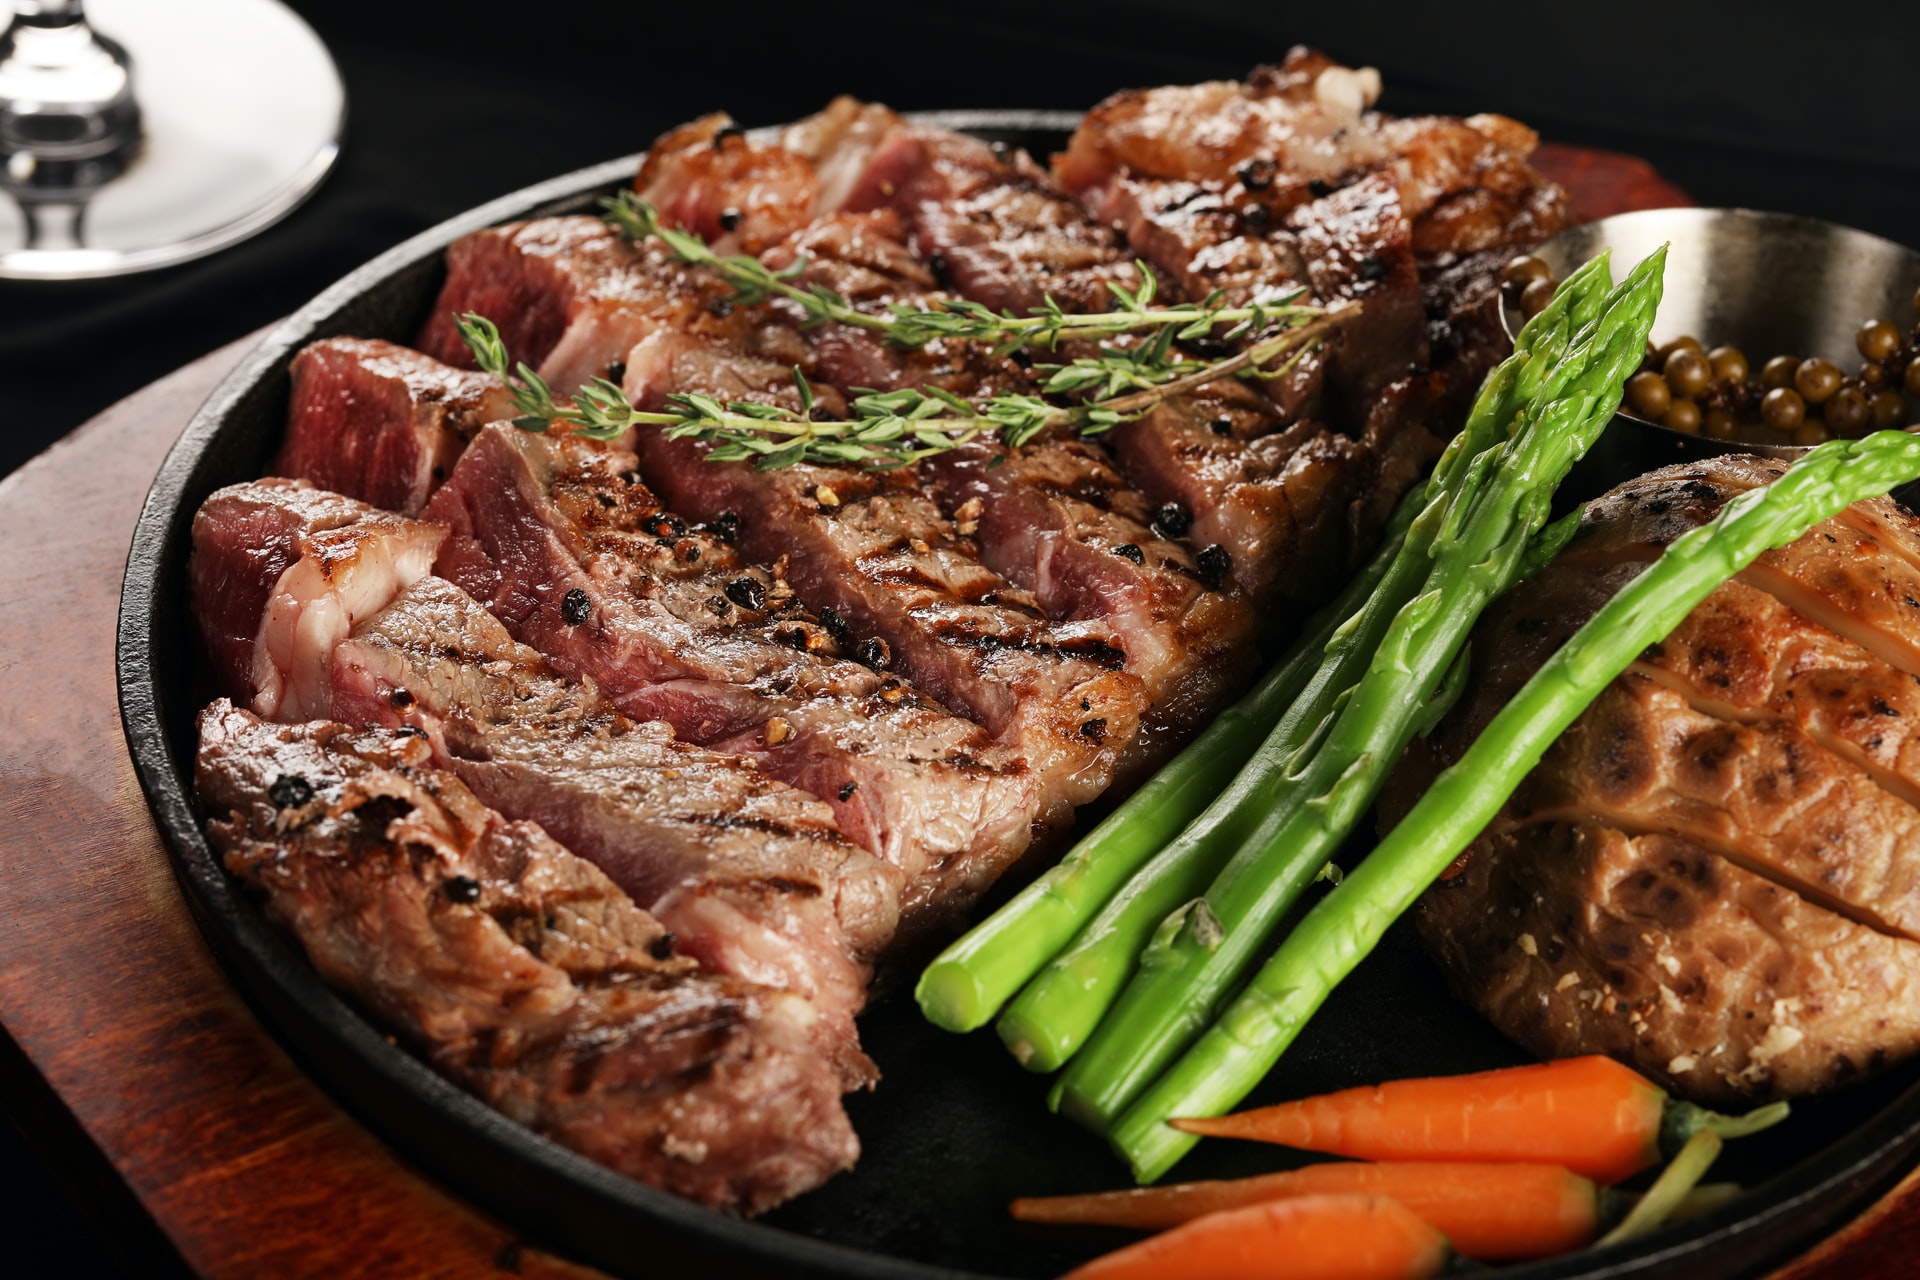 grilled steak with vegetables and bread